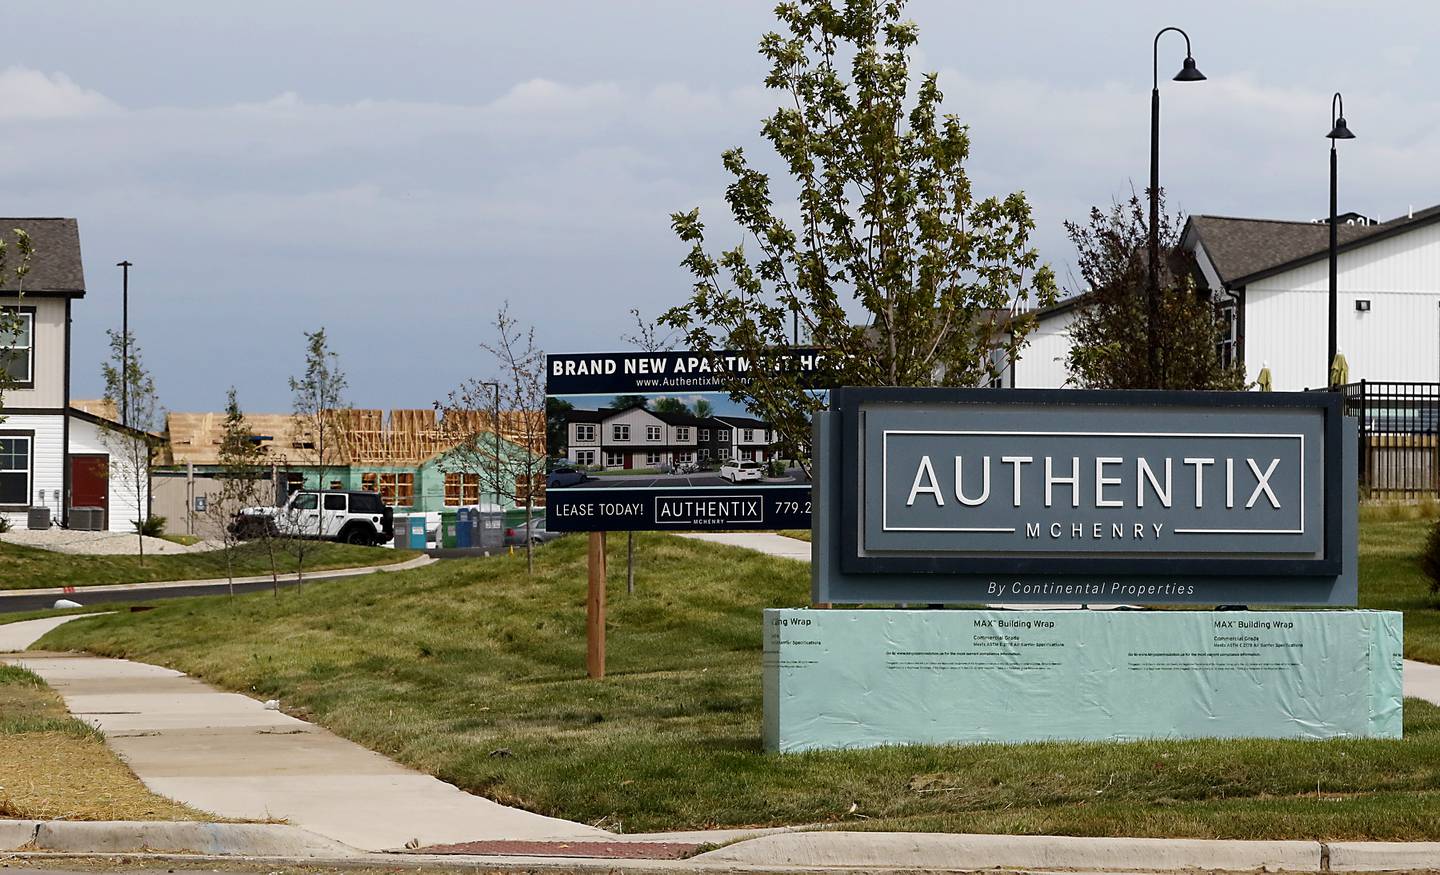 Work continues on Continental Properties' 288-unit Authentix McHenry apartment community at 3415 Blake Road, McHenry on Wednesday, August 3, 2022. their new apartment community.